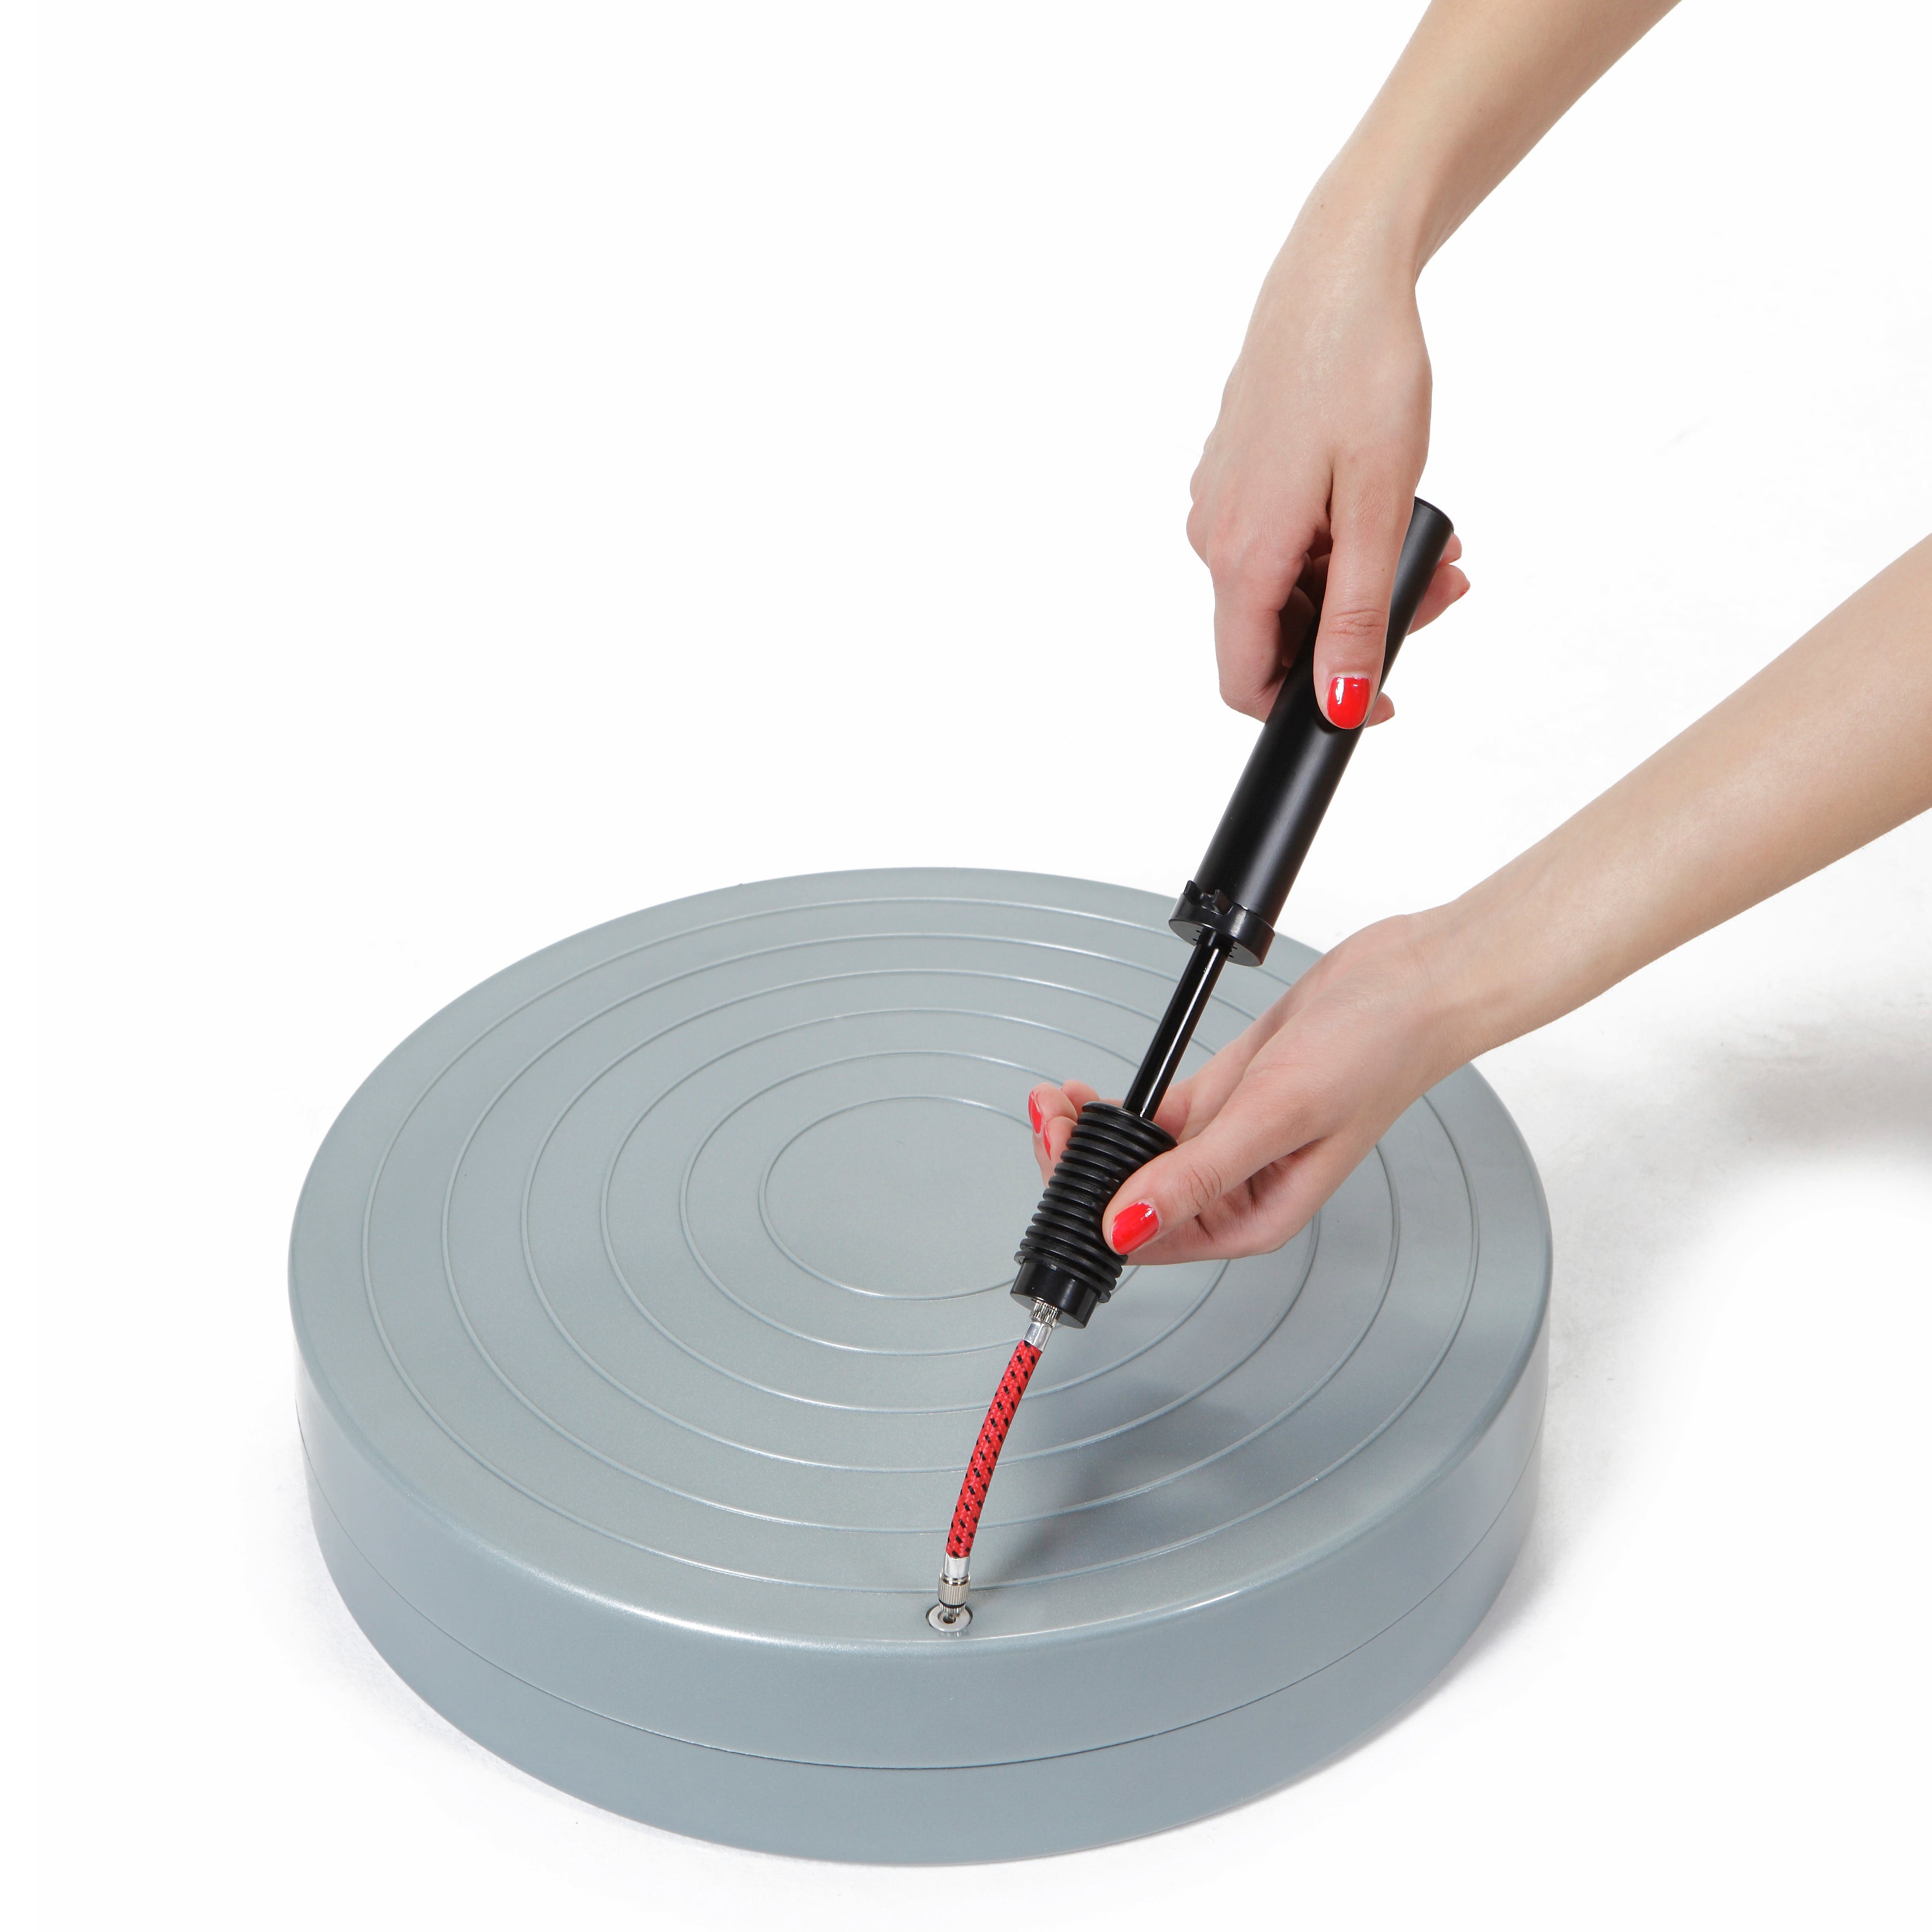 This proprioception board is a valid tool for training and rehabilitation as it allows different kinds of exercises to improve balance, muscle tone and posture. The Stability Wheel can be used in different training programs as basket, tennis and volleyball. It is also suitable for ski gymnastics. Inflate the product to the needed stability level.